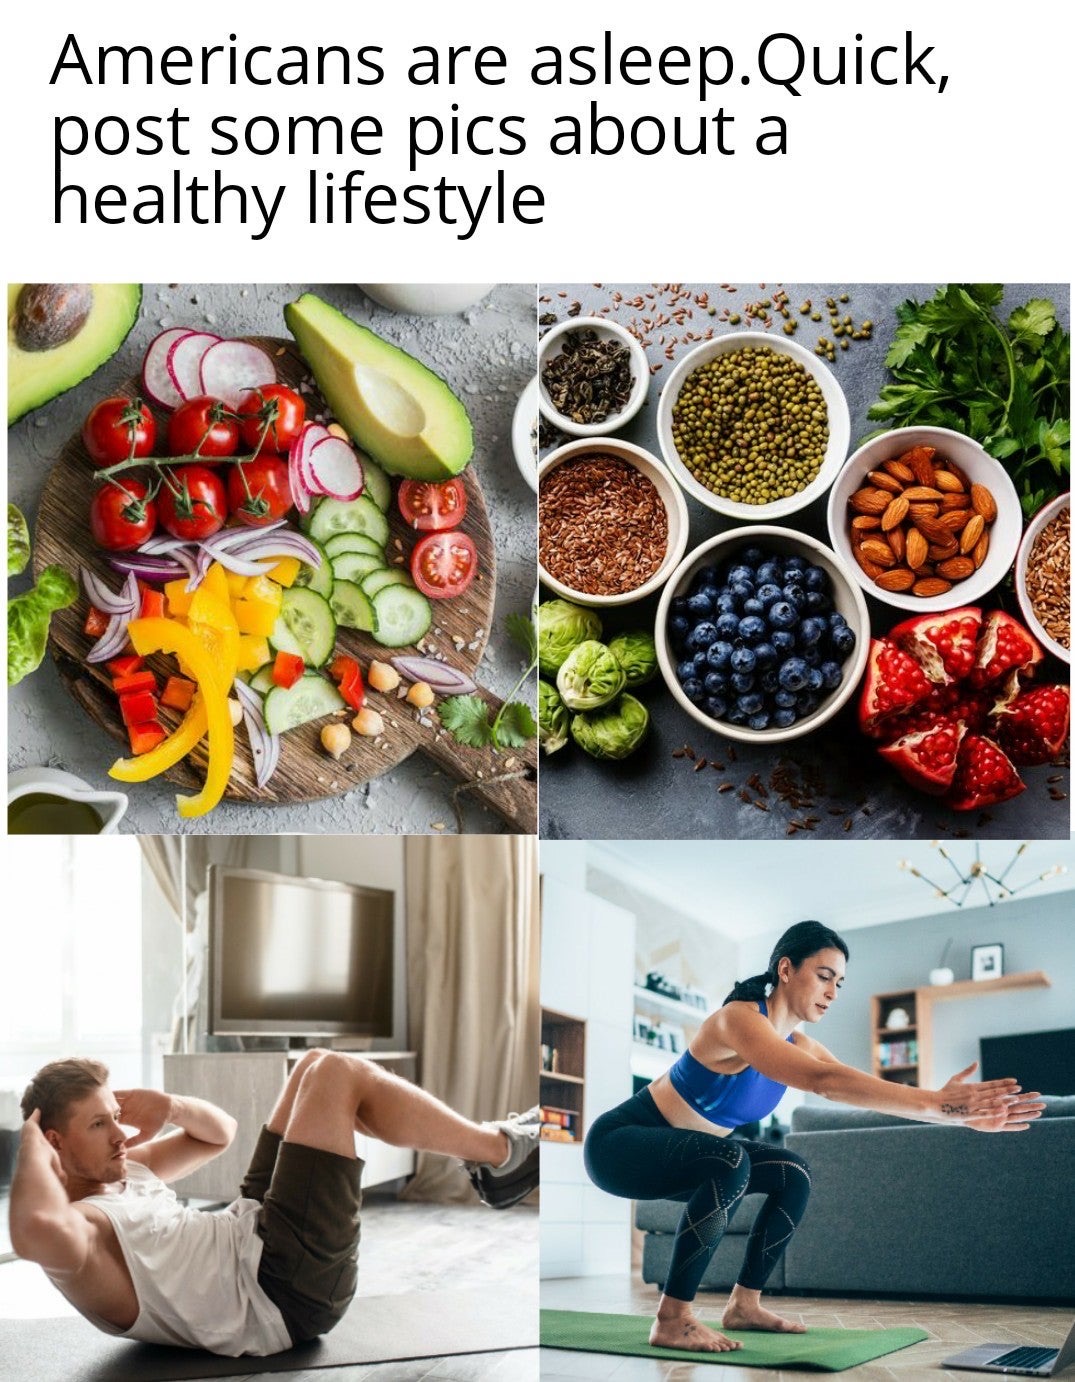 home exercise - Americans are asleep.Quick, post some pics about a healthy lifestyle